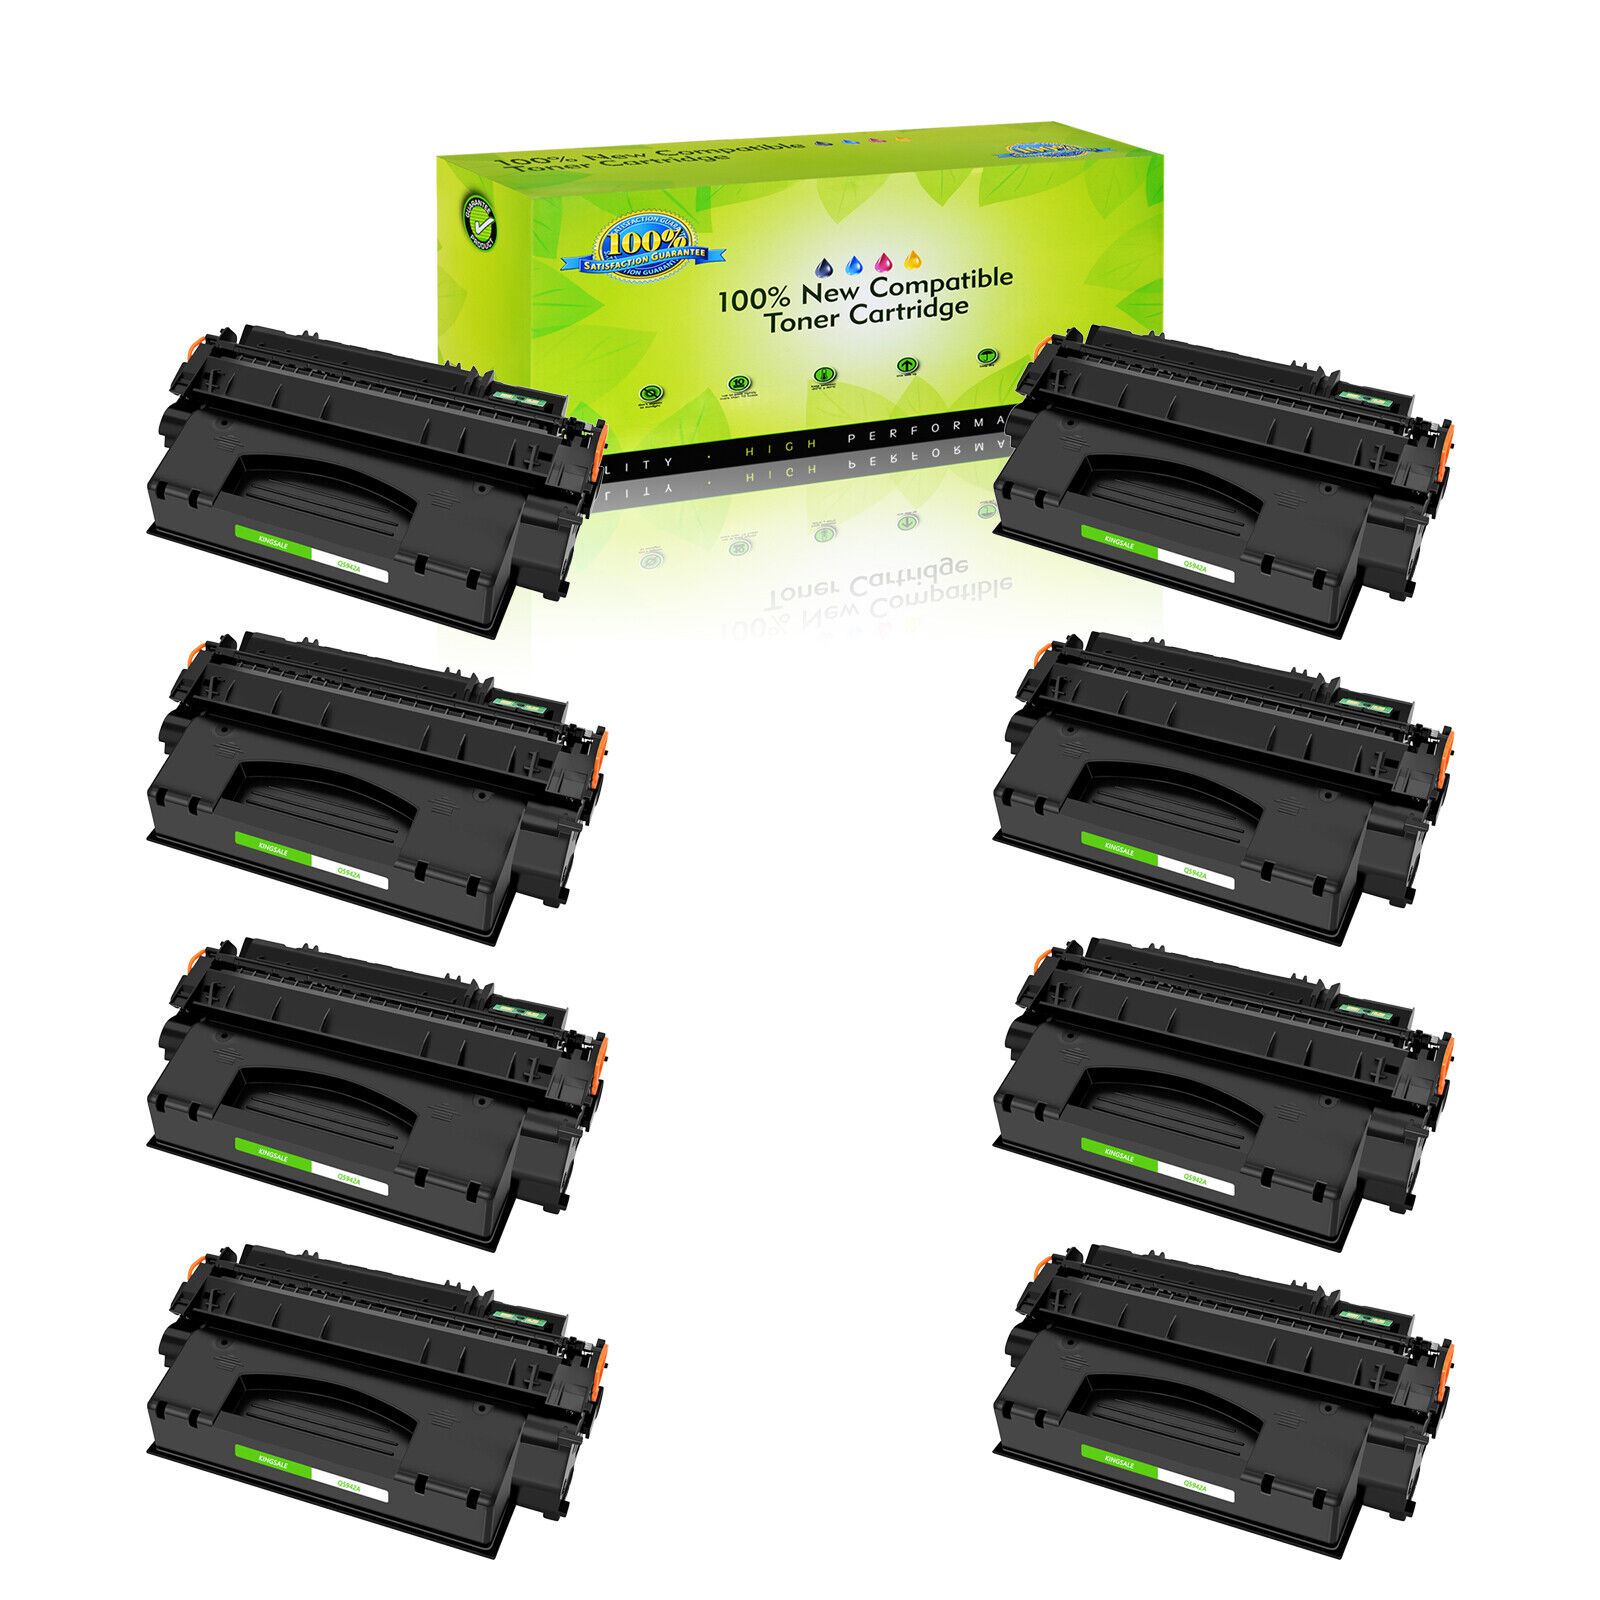 8 PACK Compatible with HP Q5942A Black Toner Cartridge 42A 4350Dtnsl 4250dtnsl